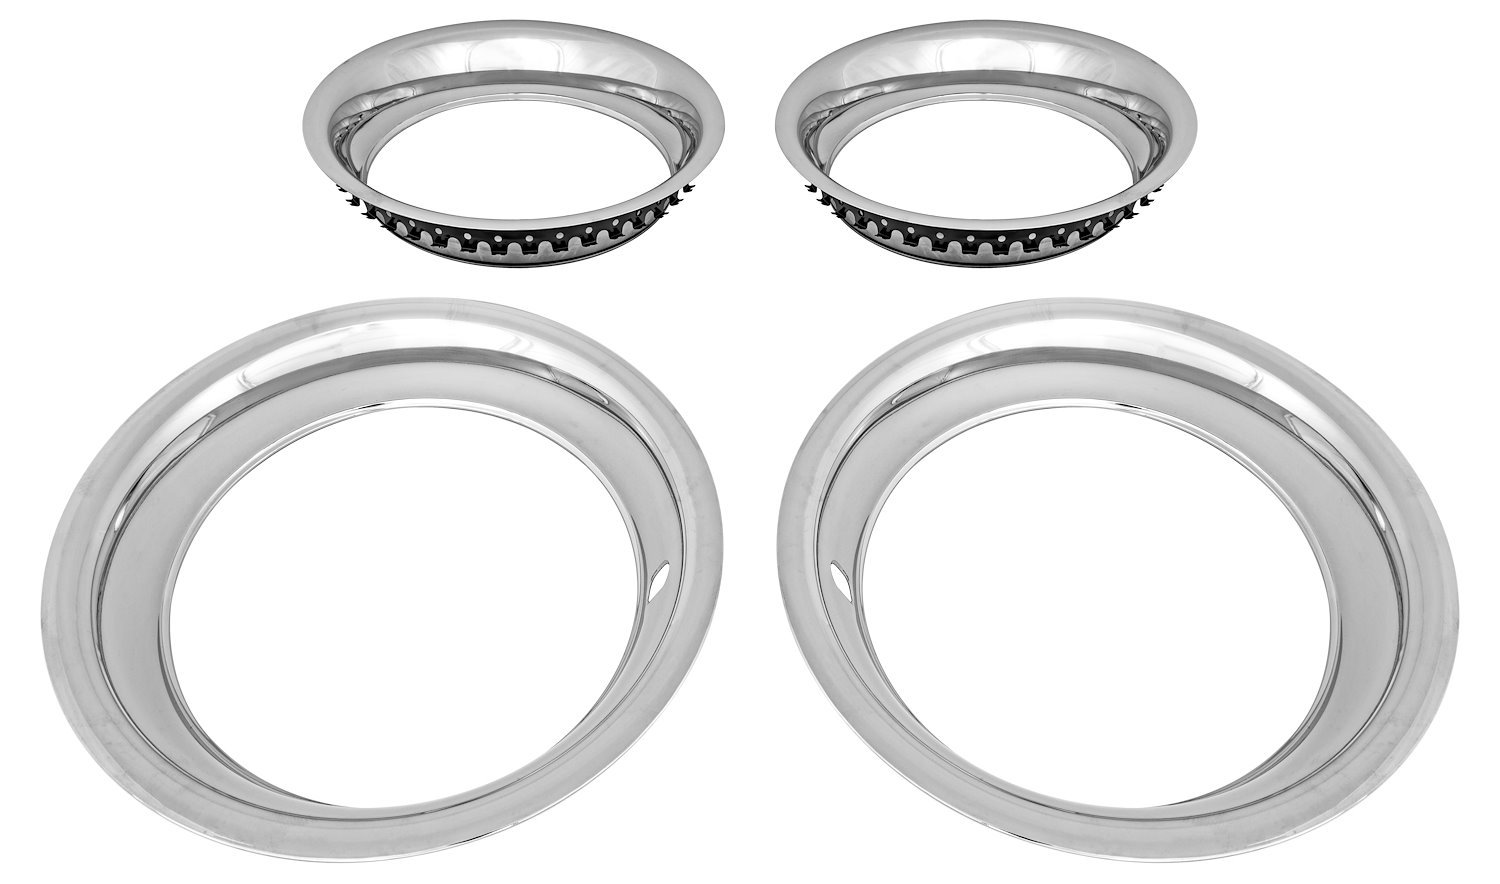 Stainless Steel Deep Dish Trim Ring Set for 15 in. x 8 in. & 15 in. x 10 in. Wheels [3 in. D x 3.250 in. W]